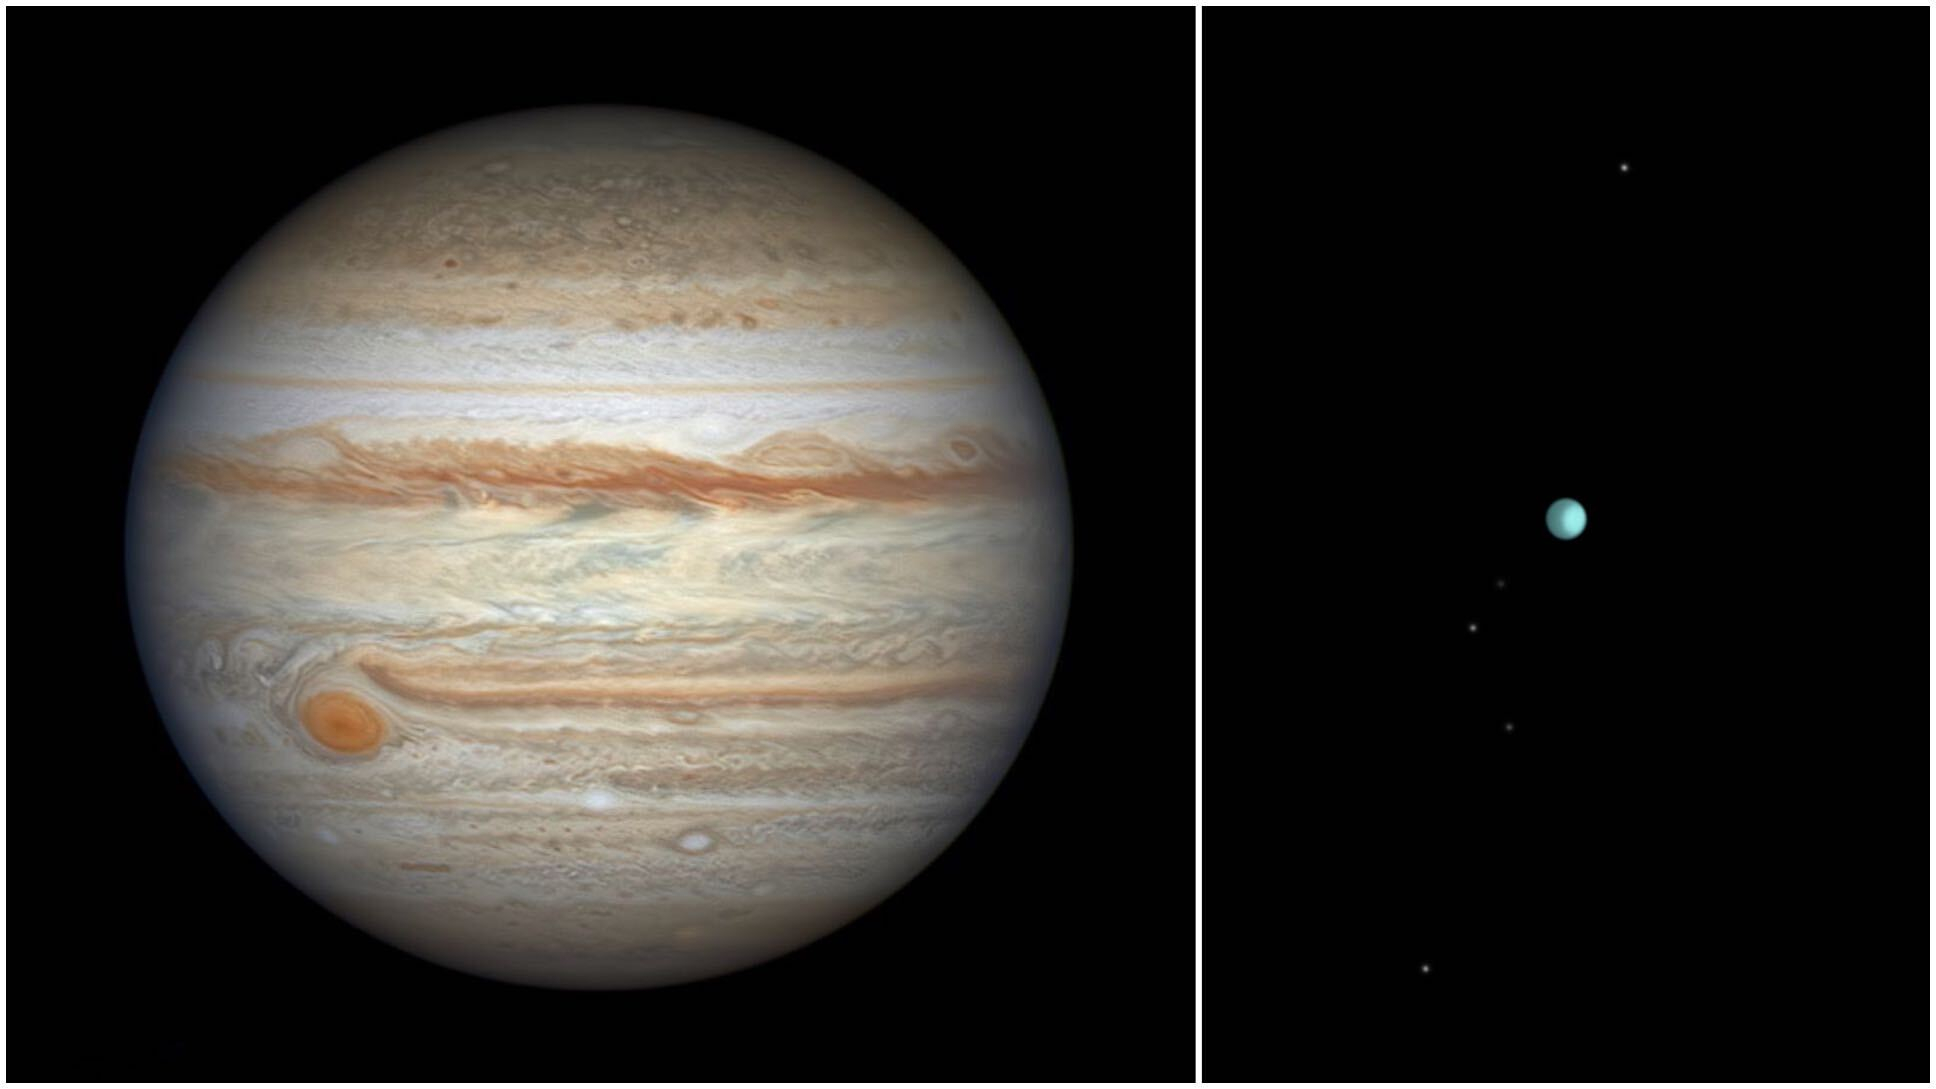 pictures of jupiter, and also a small uranus with five tiny moons